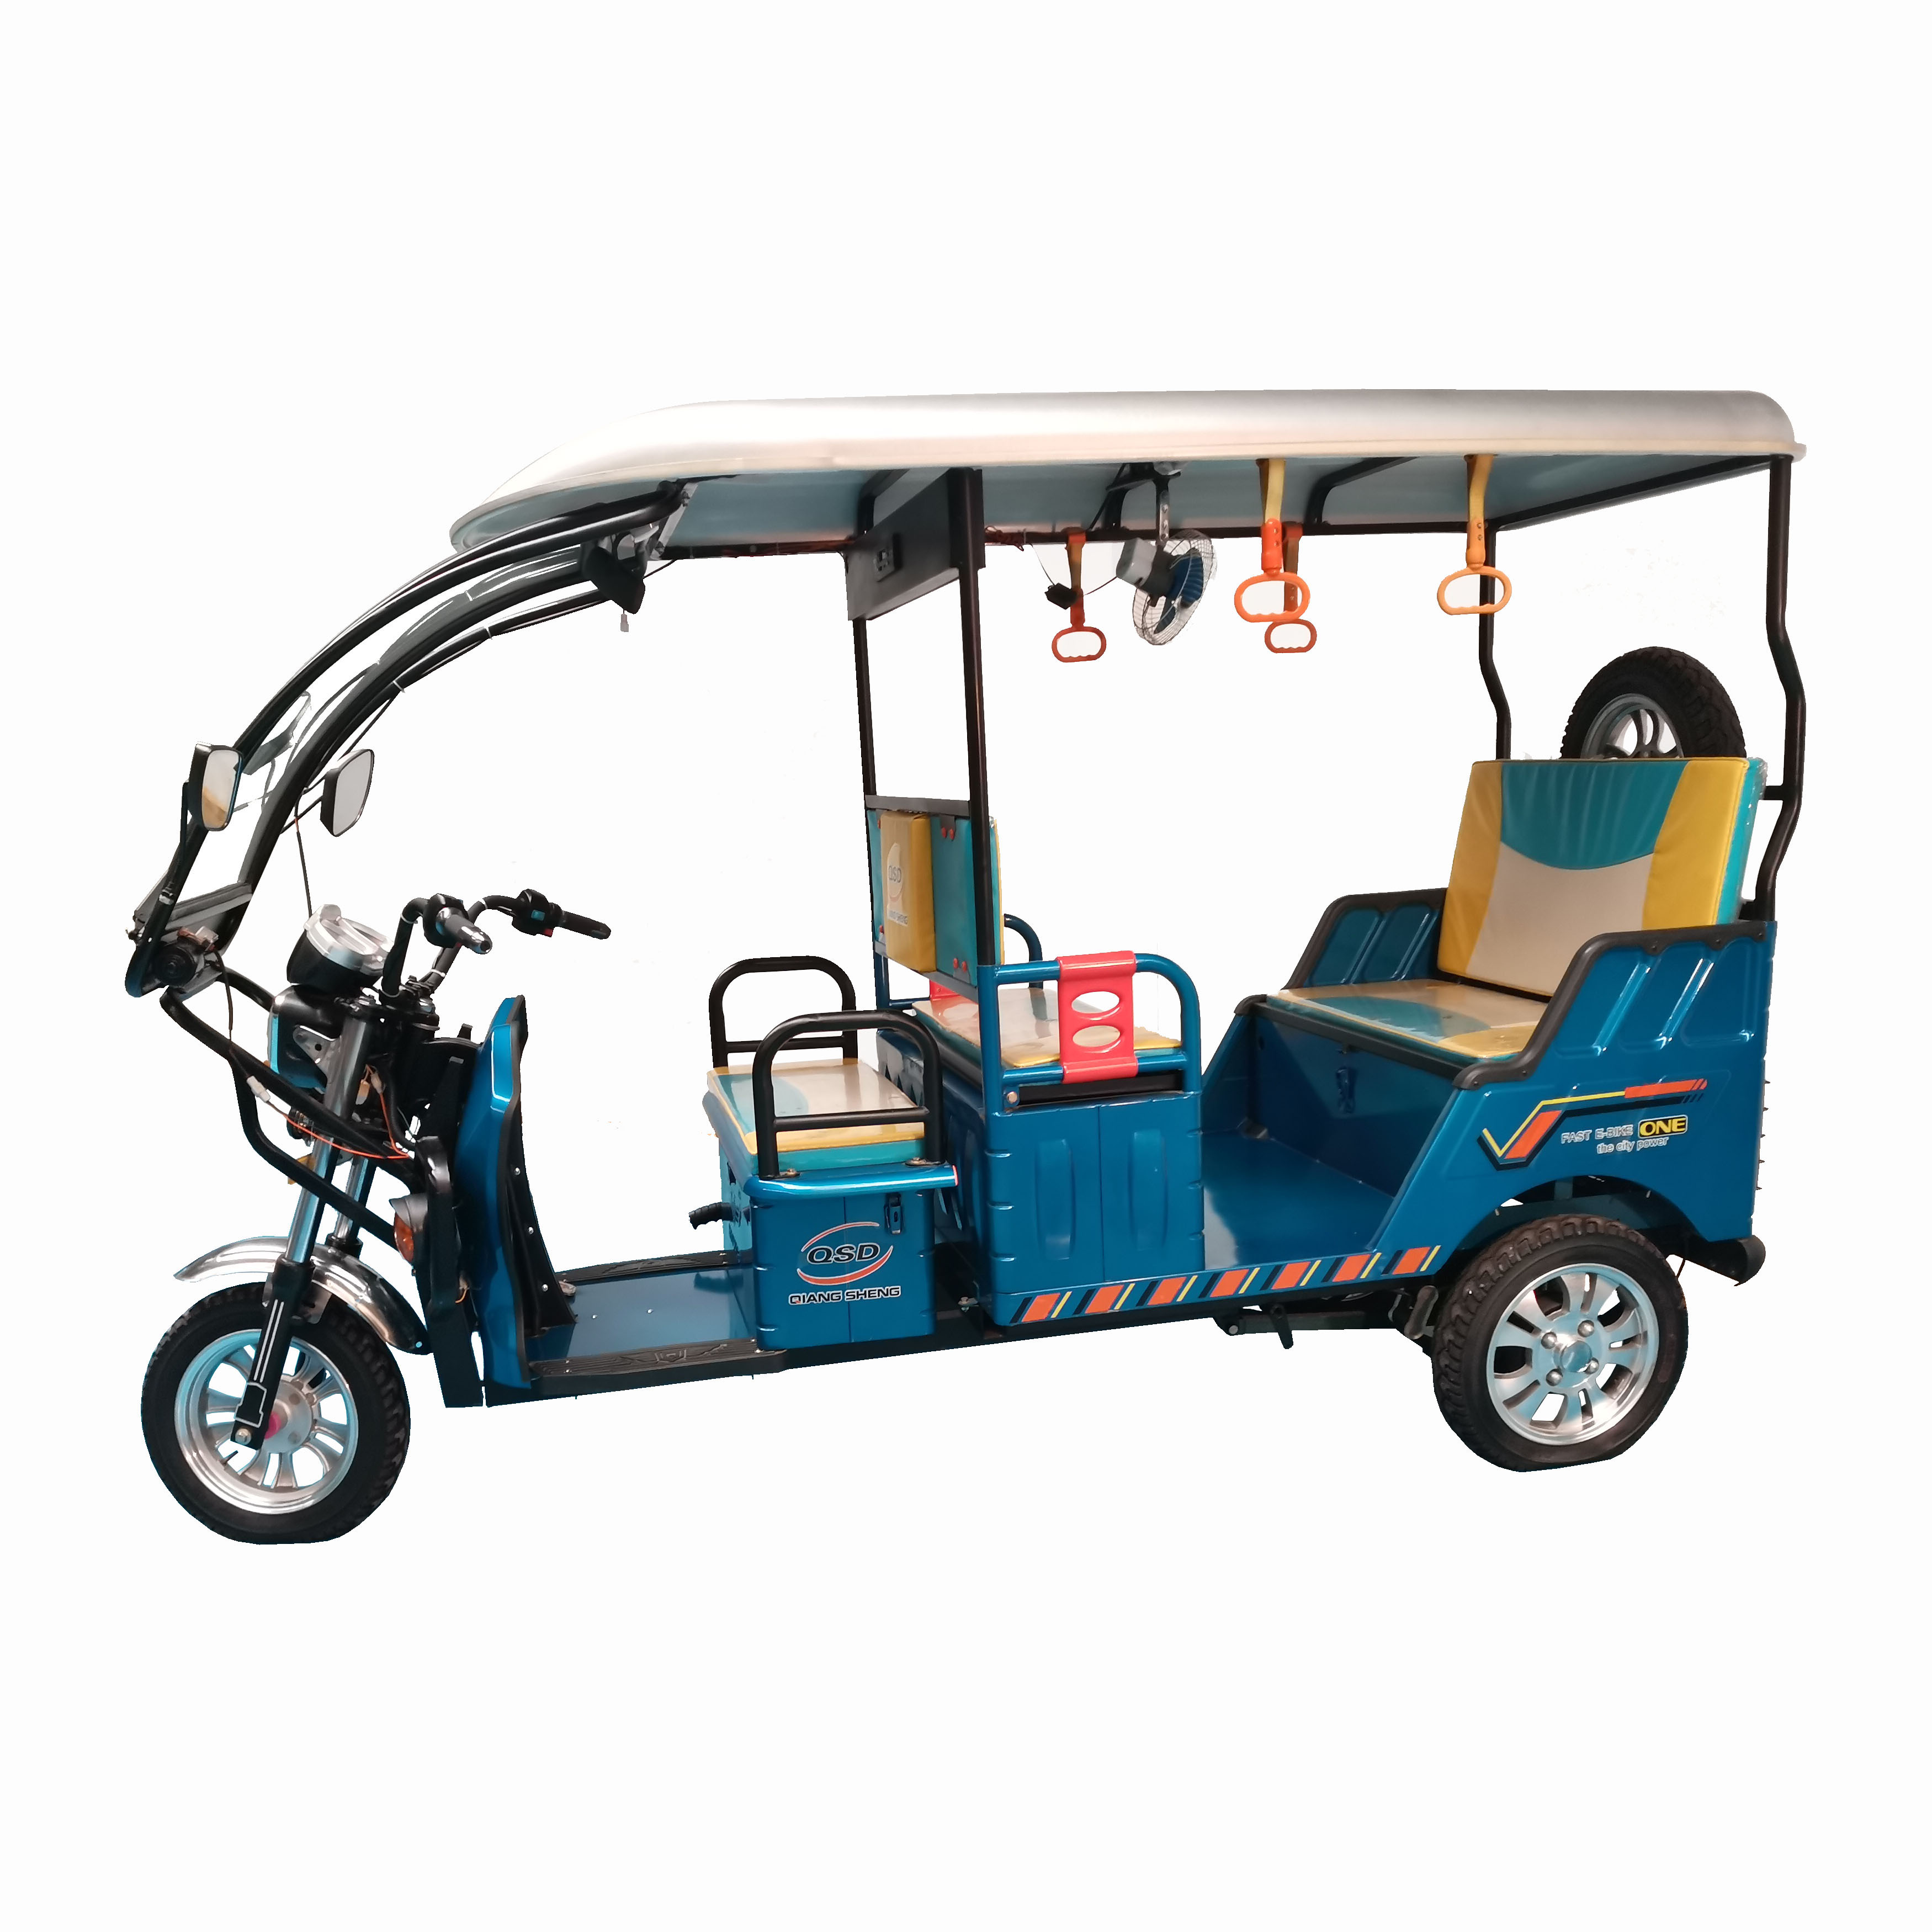 48v 900w Motor 40km/h Speed Battery Operated Electric Rickshaw 4 Passenger Models Three Wheel Electric Tricycle